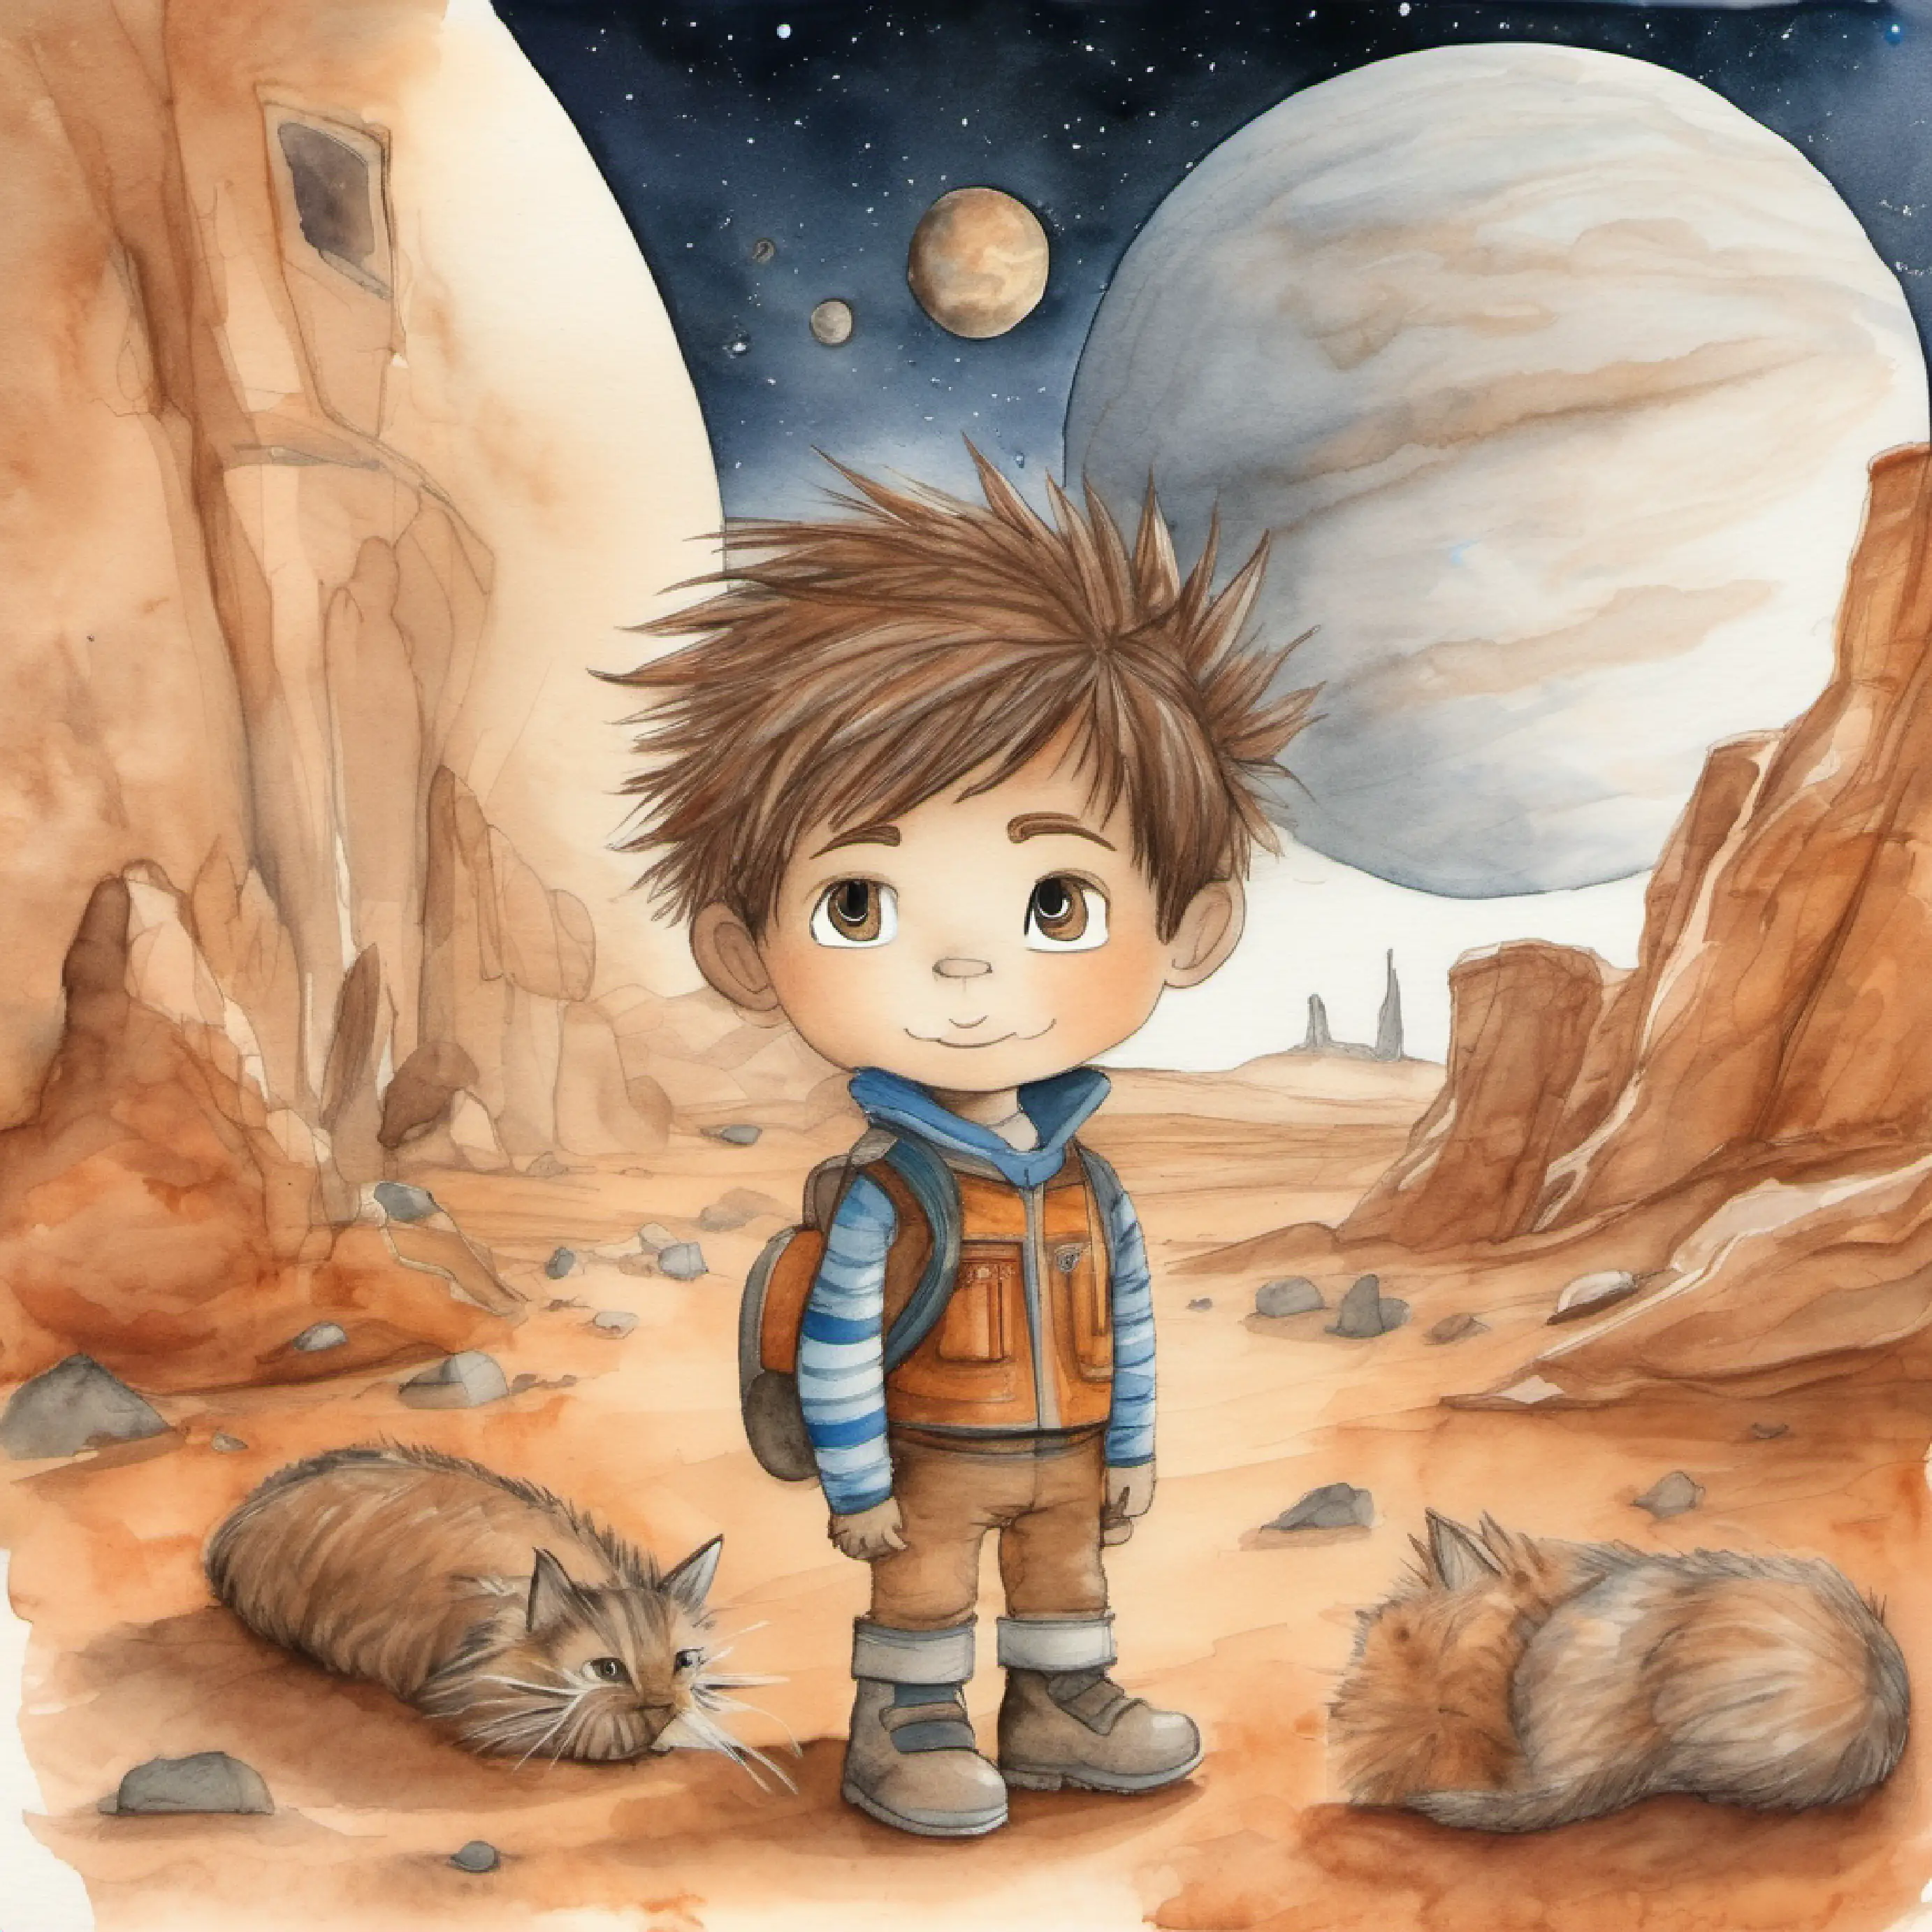 Max is on Mars with a giant cat.